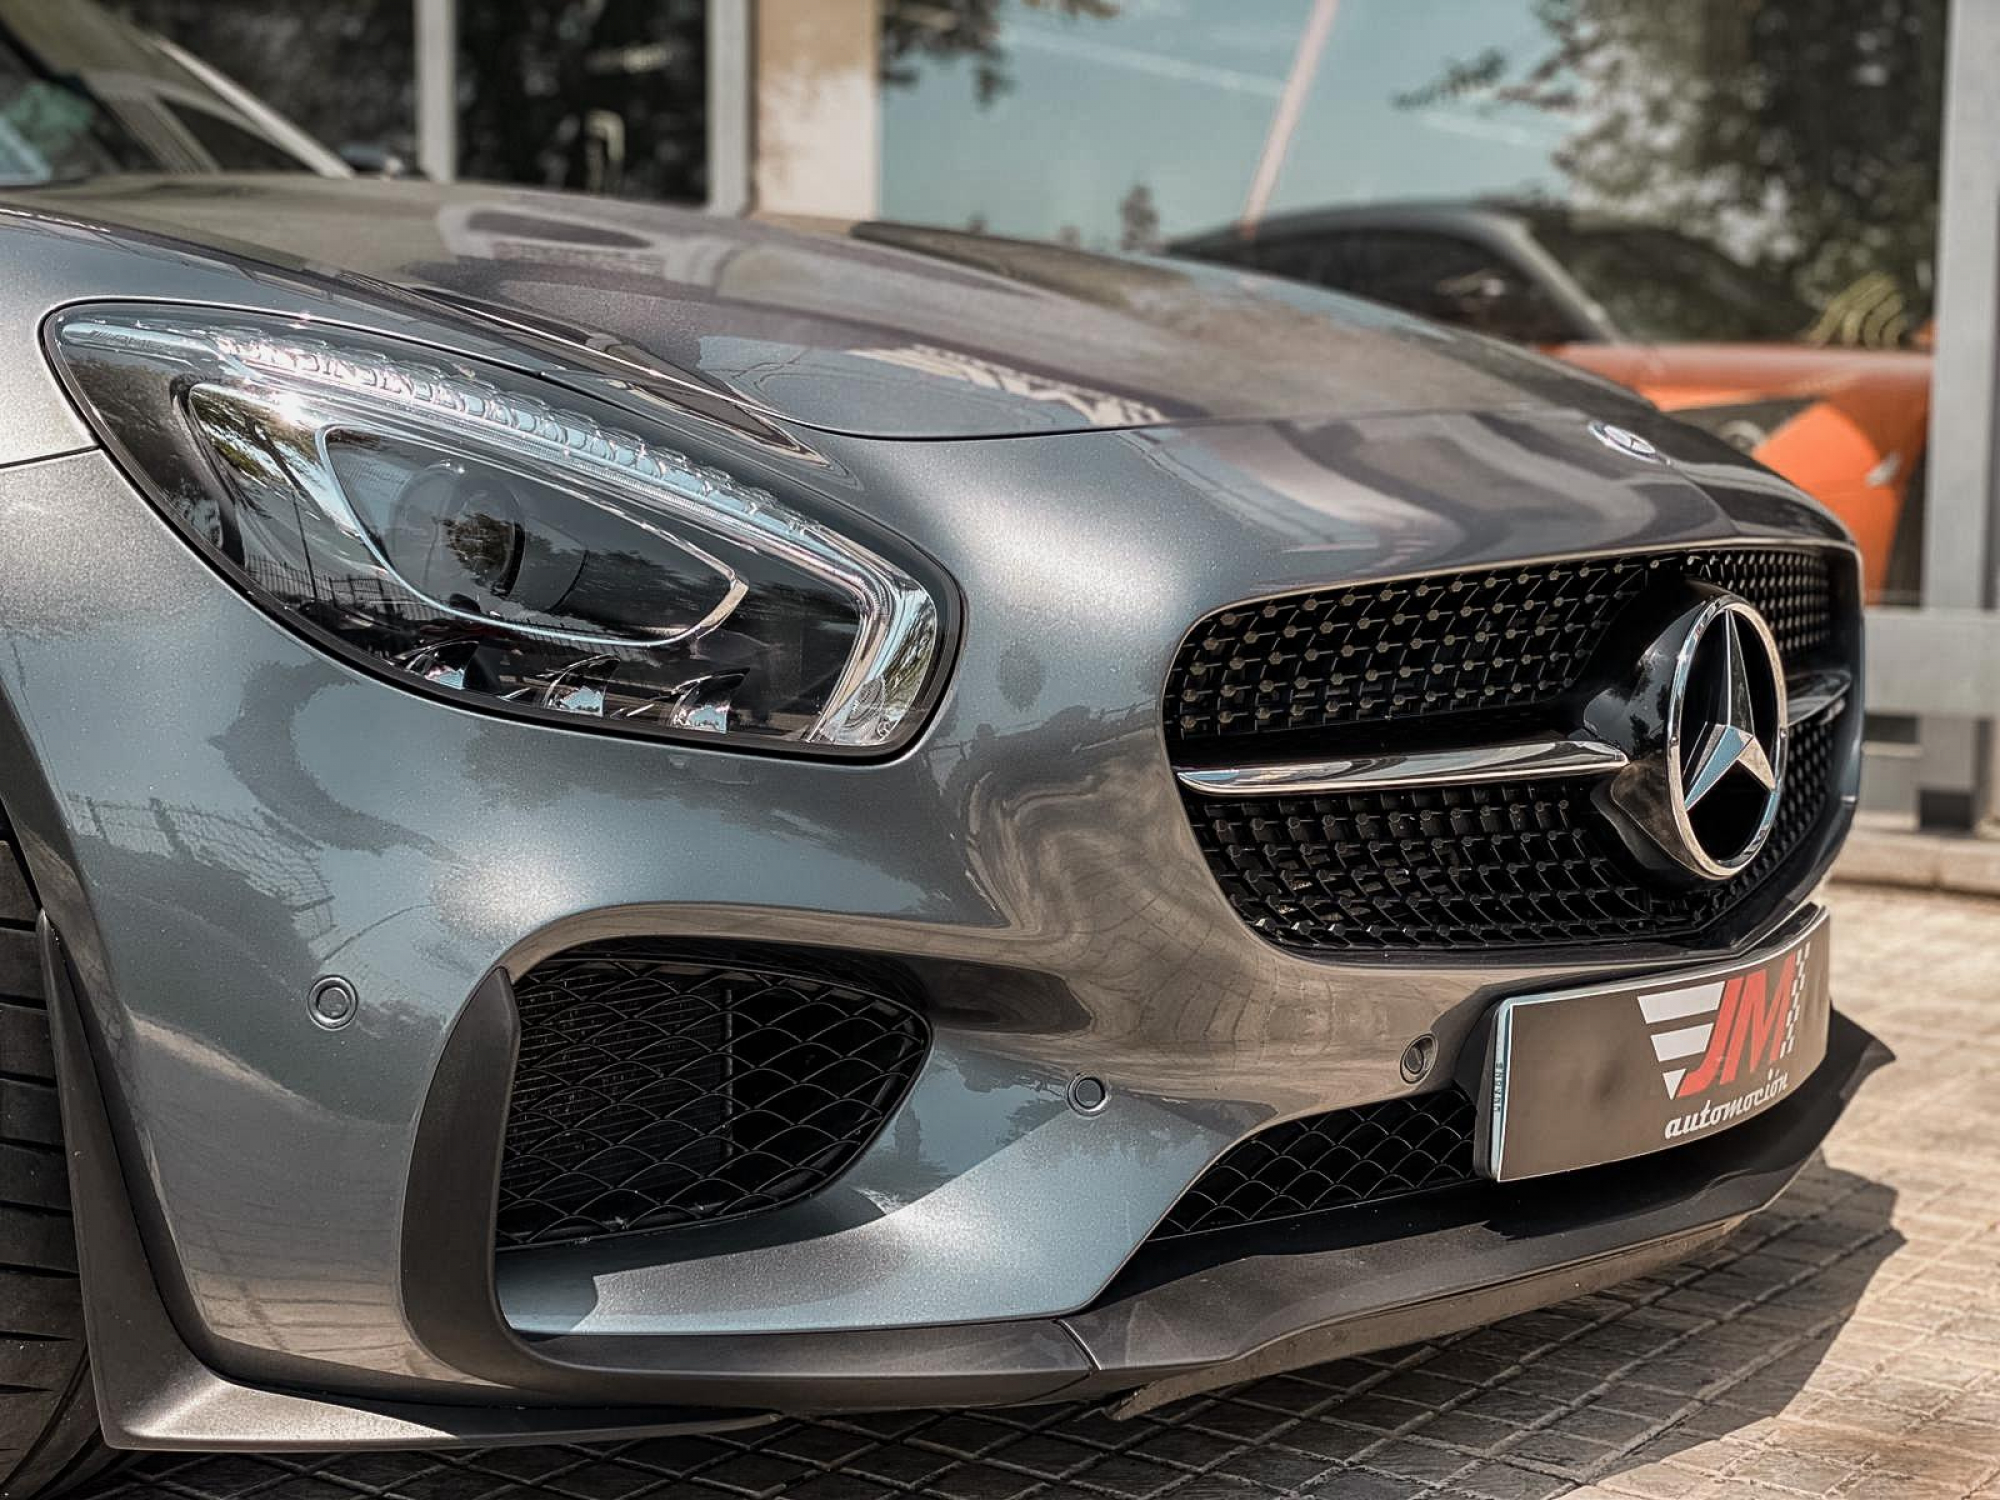 MERCEDES-BENZ AMG GT-S EDITION 1 -FULL OPTIONS-